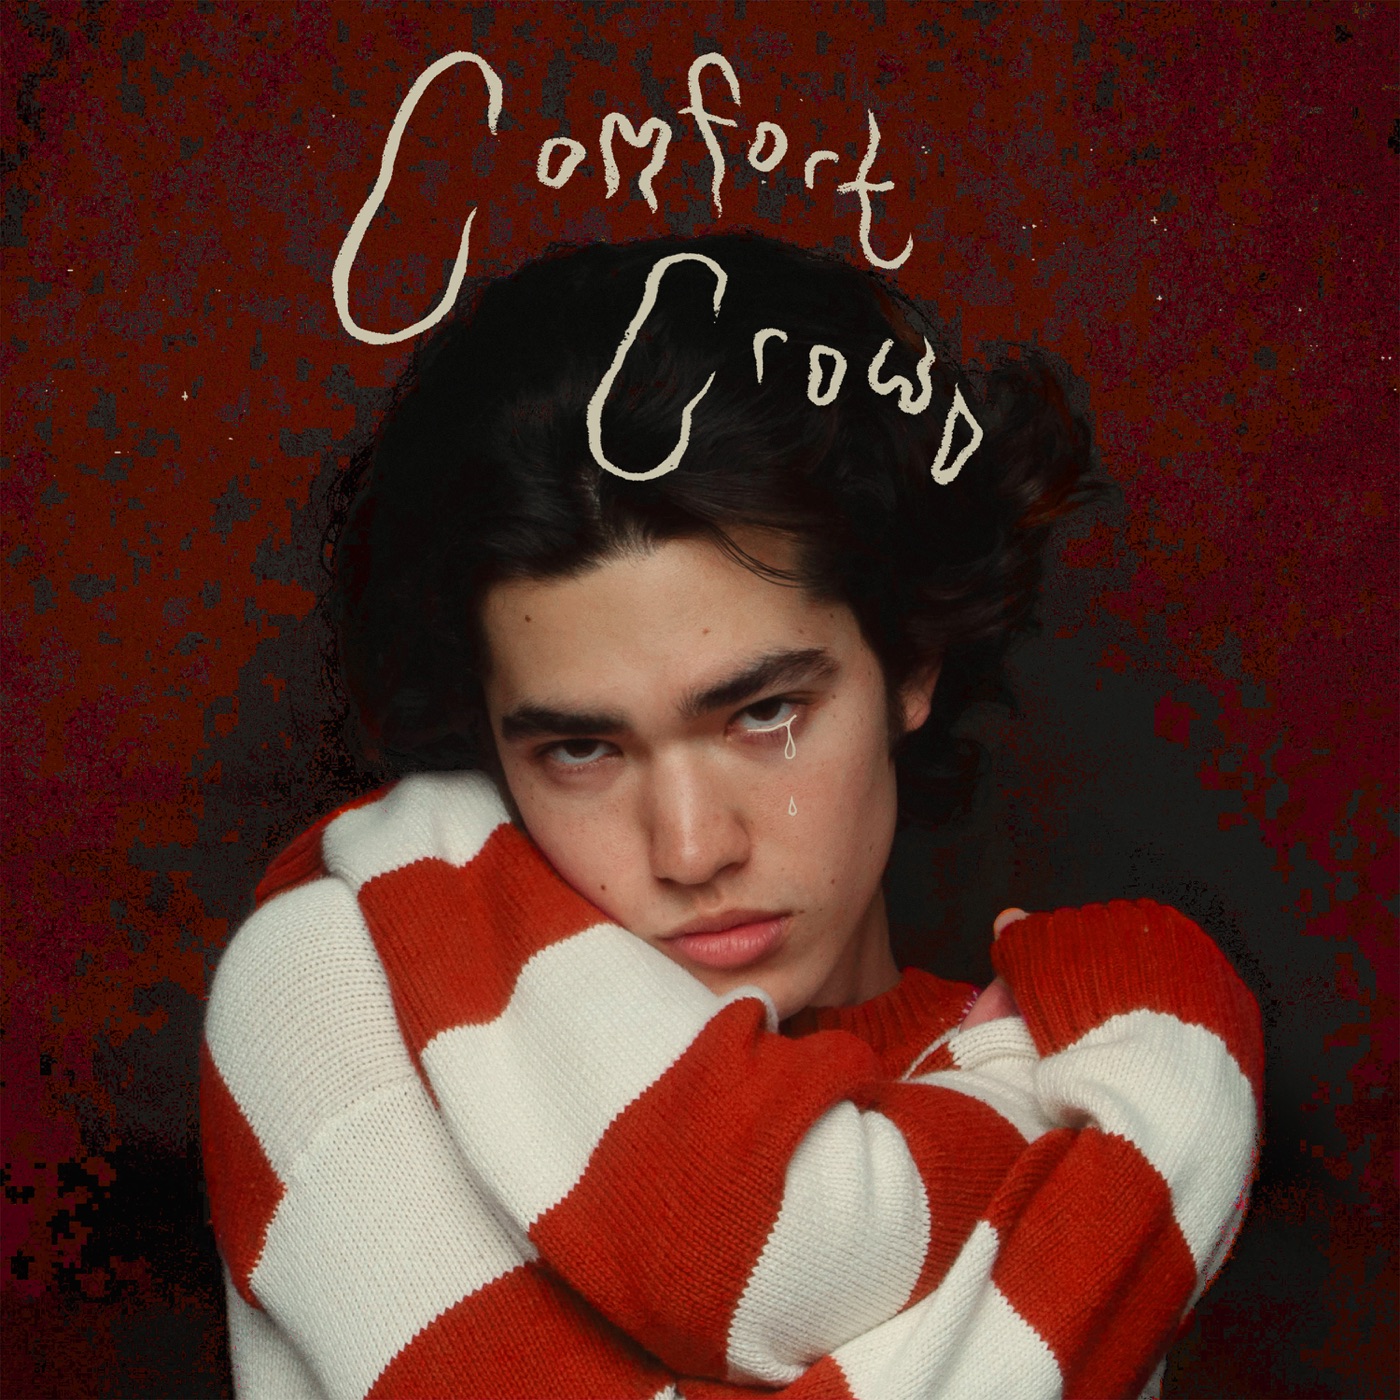 Download Conan Gray Comfort Crowd Single [iTunes Plus AAC M4A